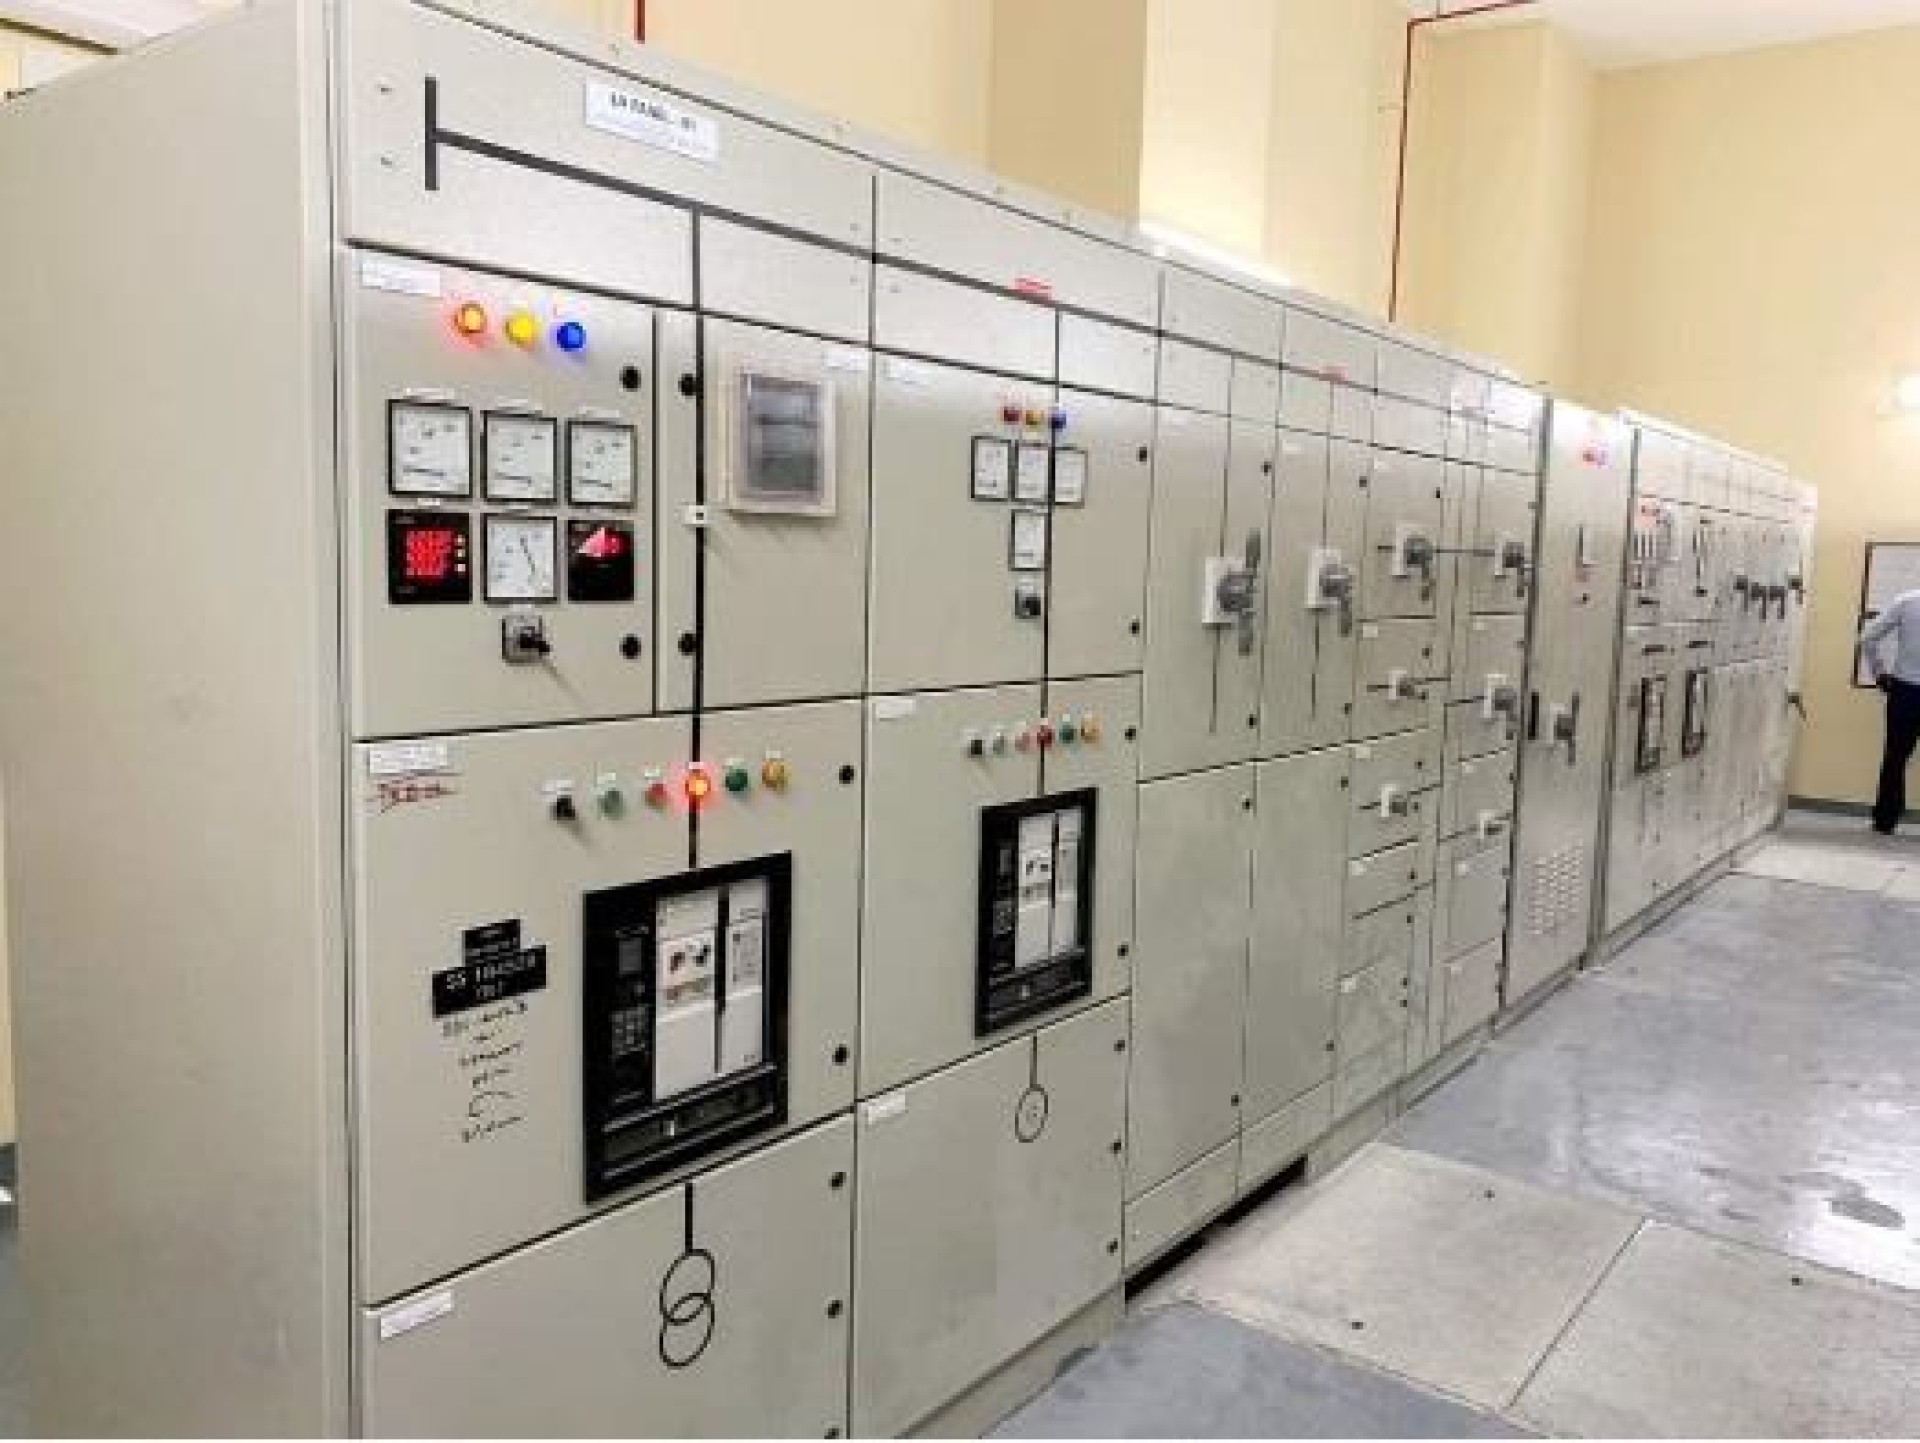 Industrial Control System